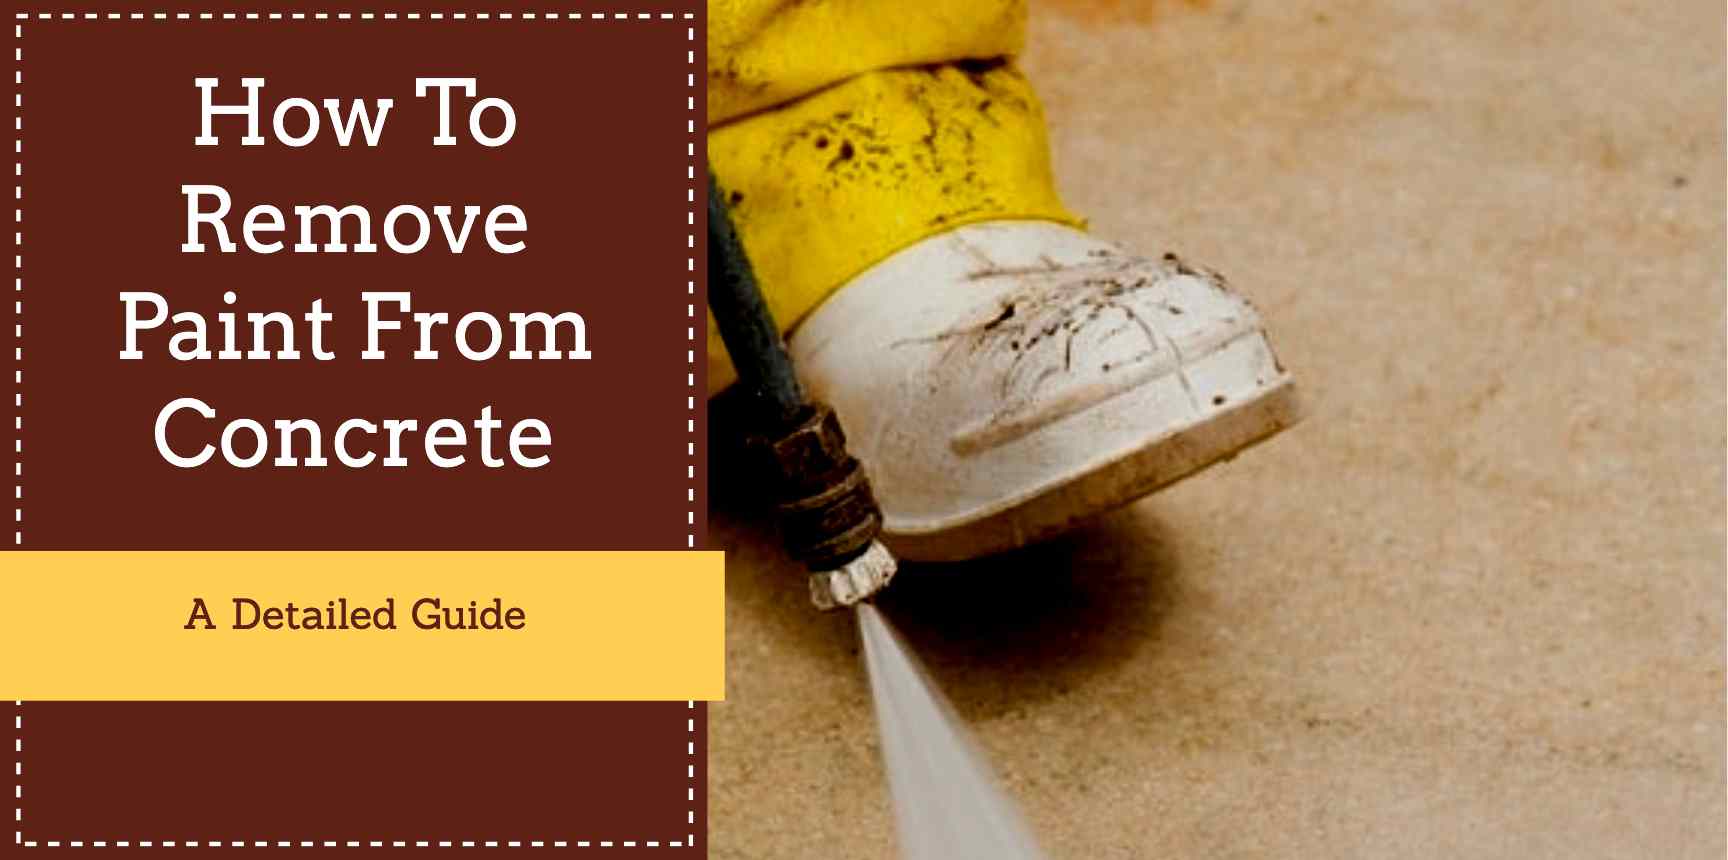 How To Remove Paint From concrete